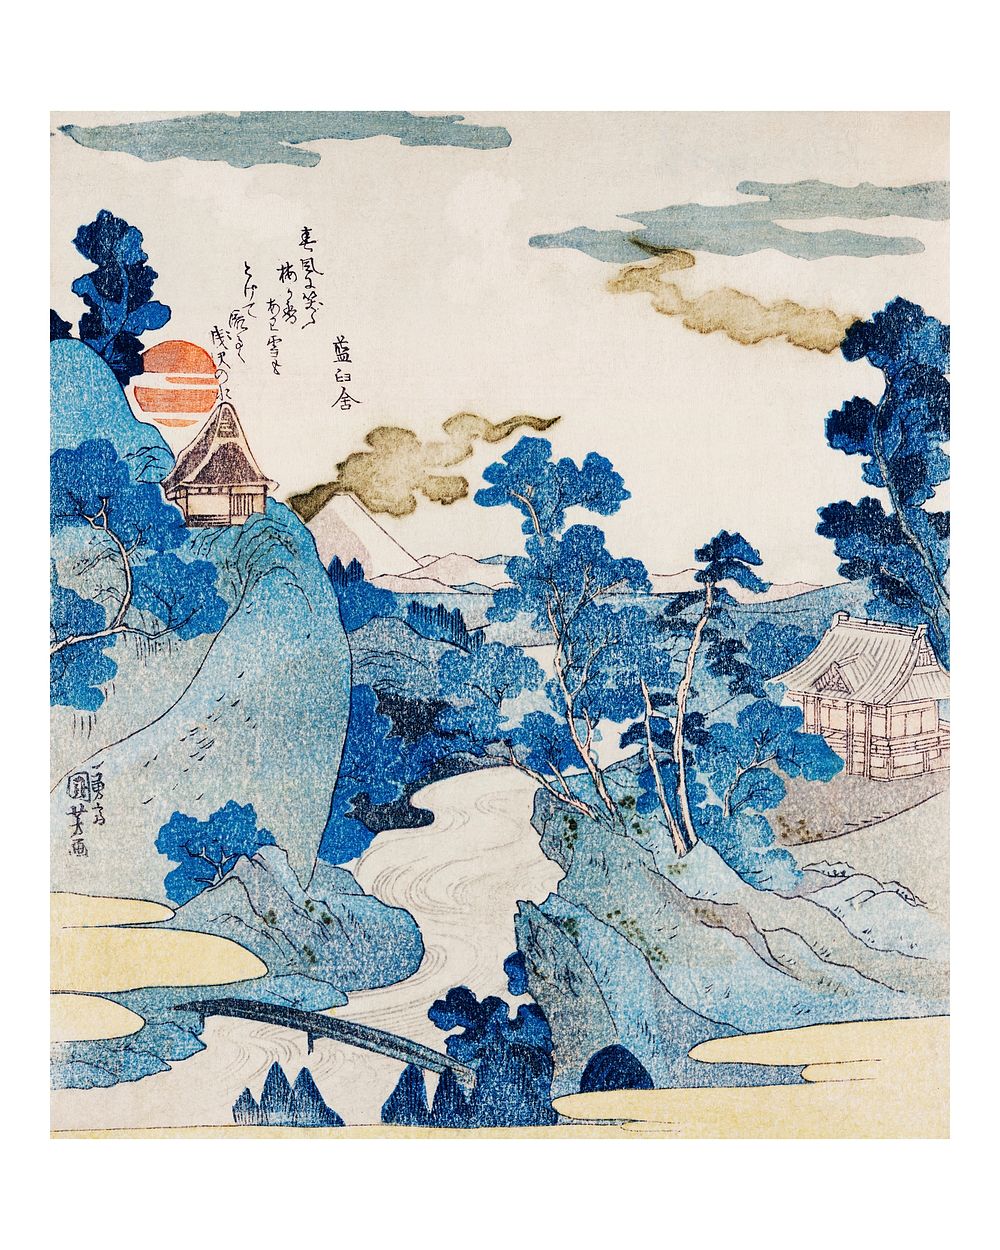 The stream of Asazawa in spring with the view of Mount Fuji from the hot springs at Hakone illustration wall art print and…